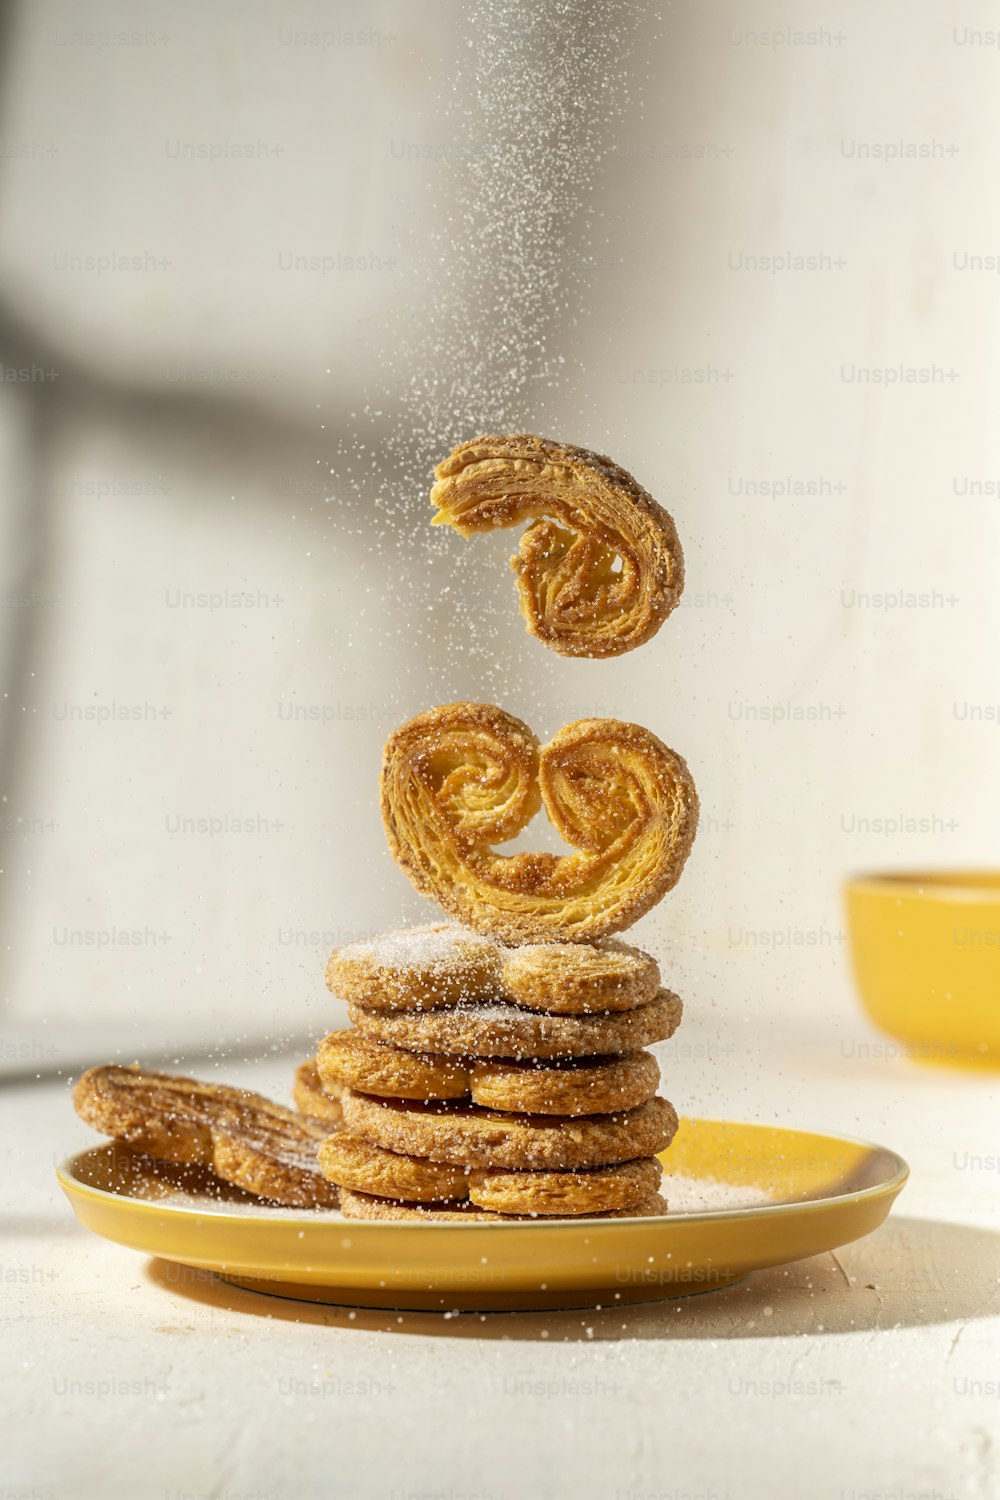 a stack of donuts falling into a yellow plate